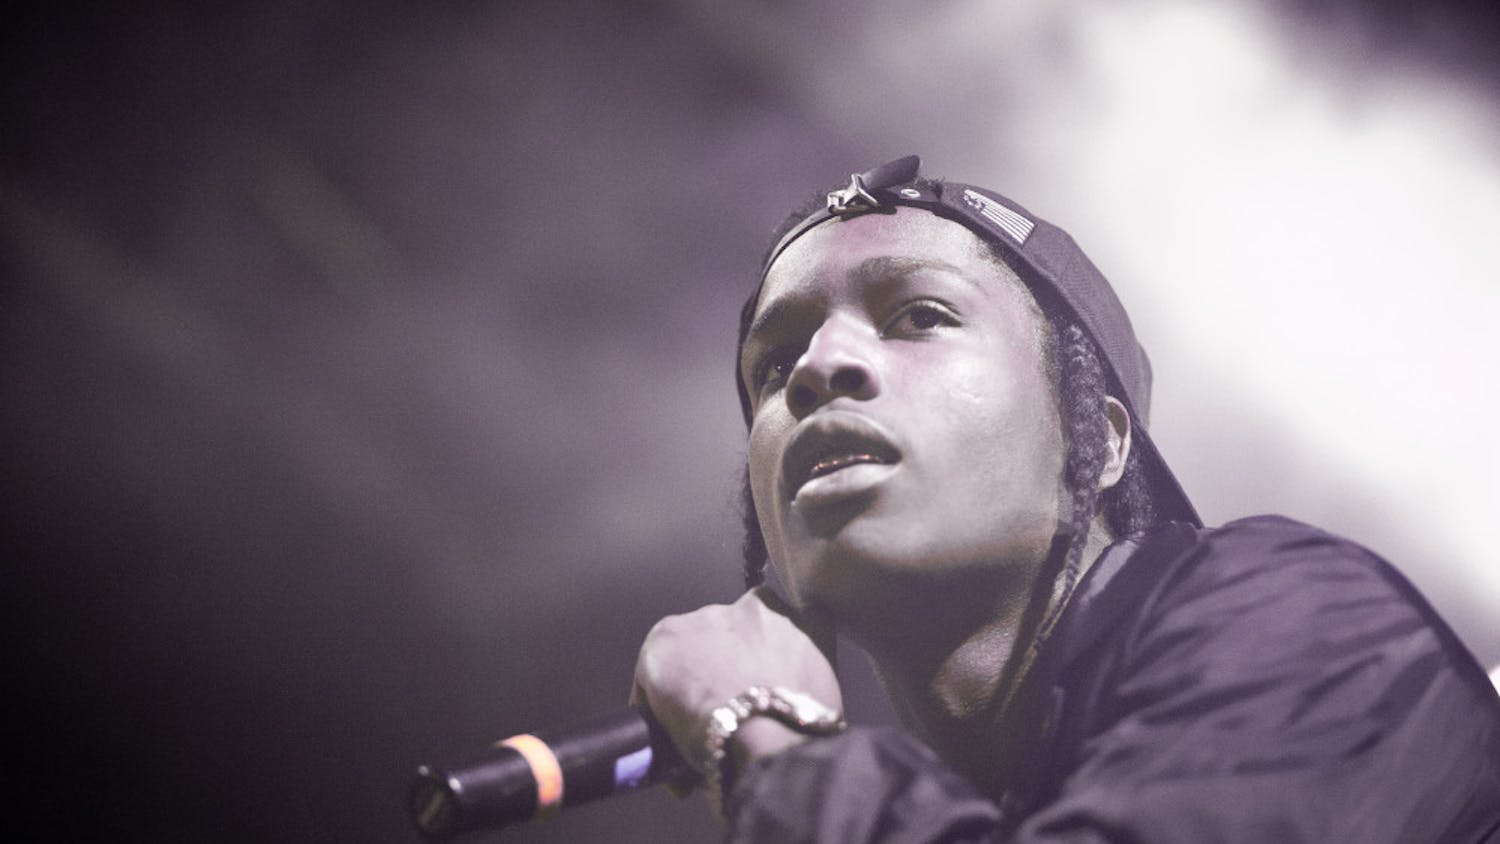 "A$AP Rocky" by Linda Flores, used under CC BY-NC-ND 2.0